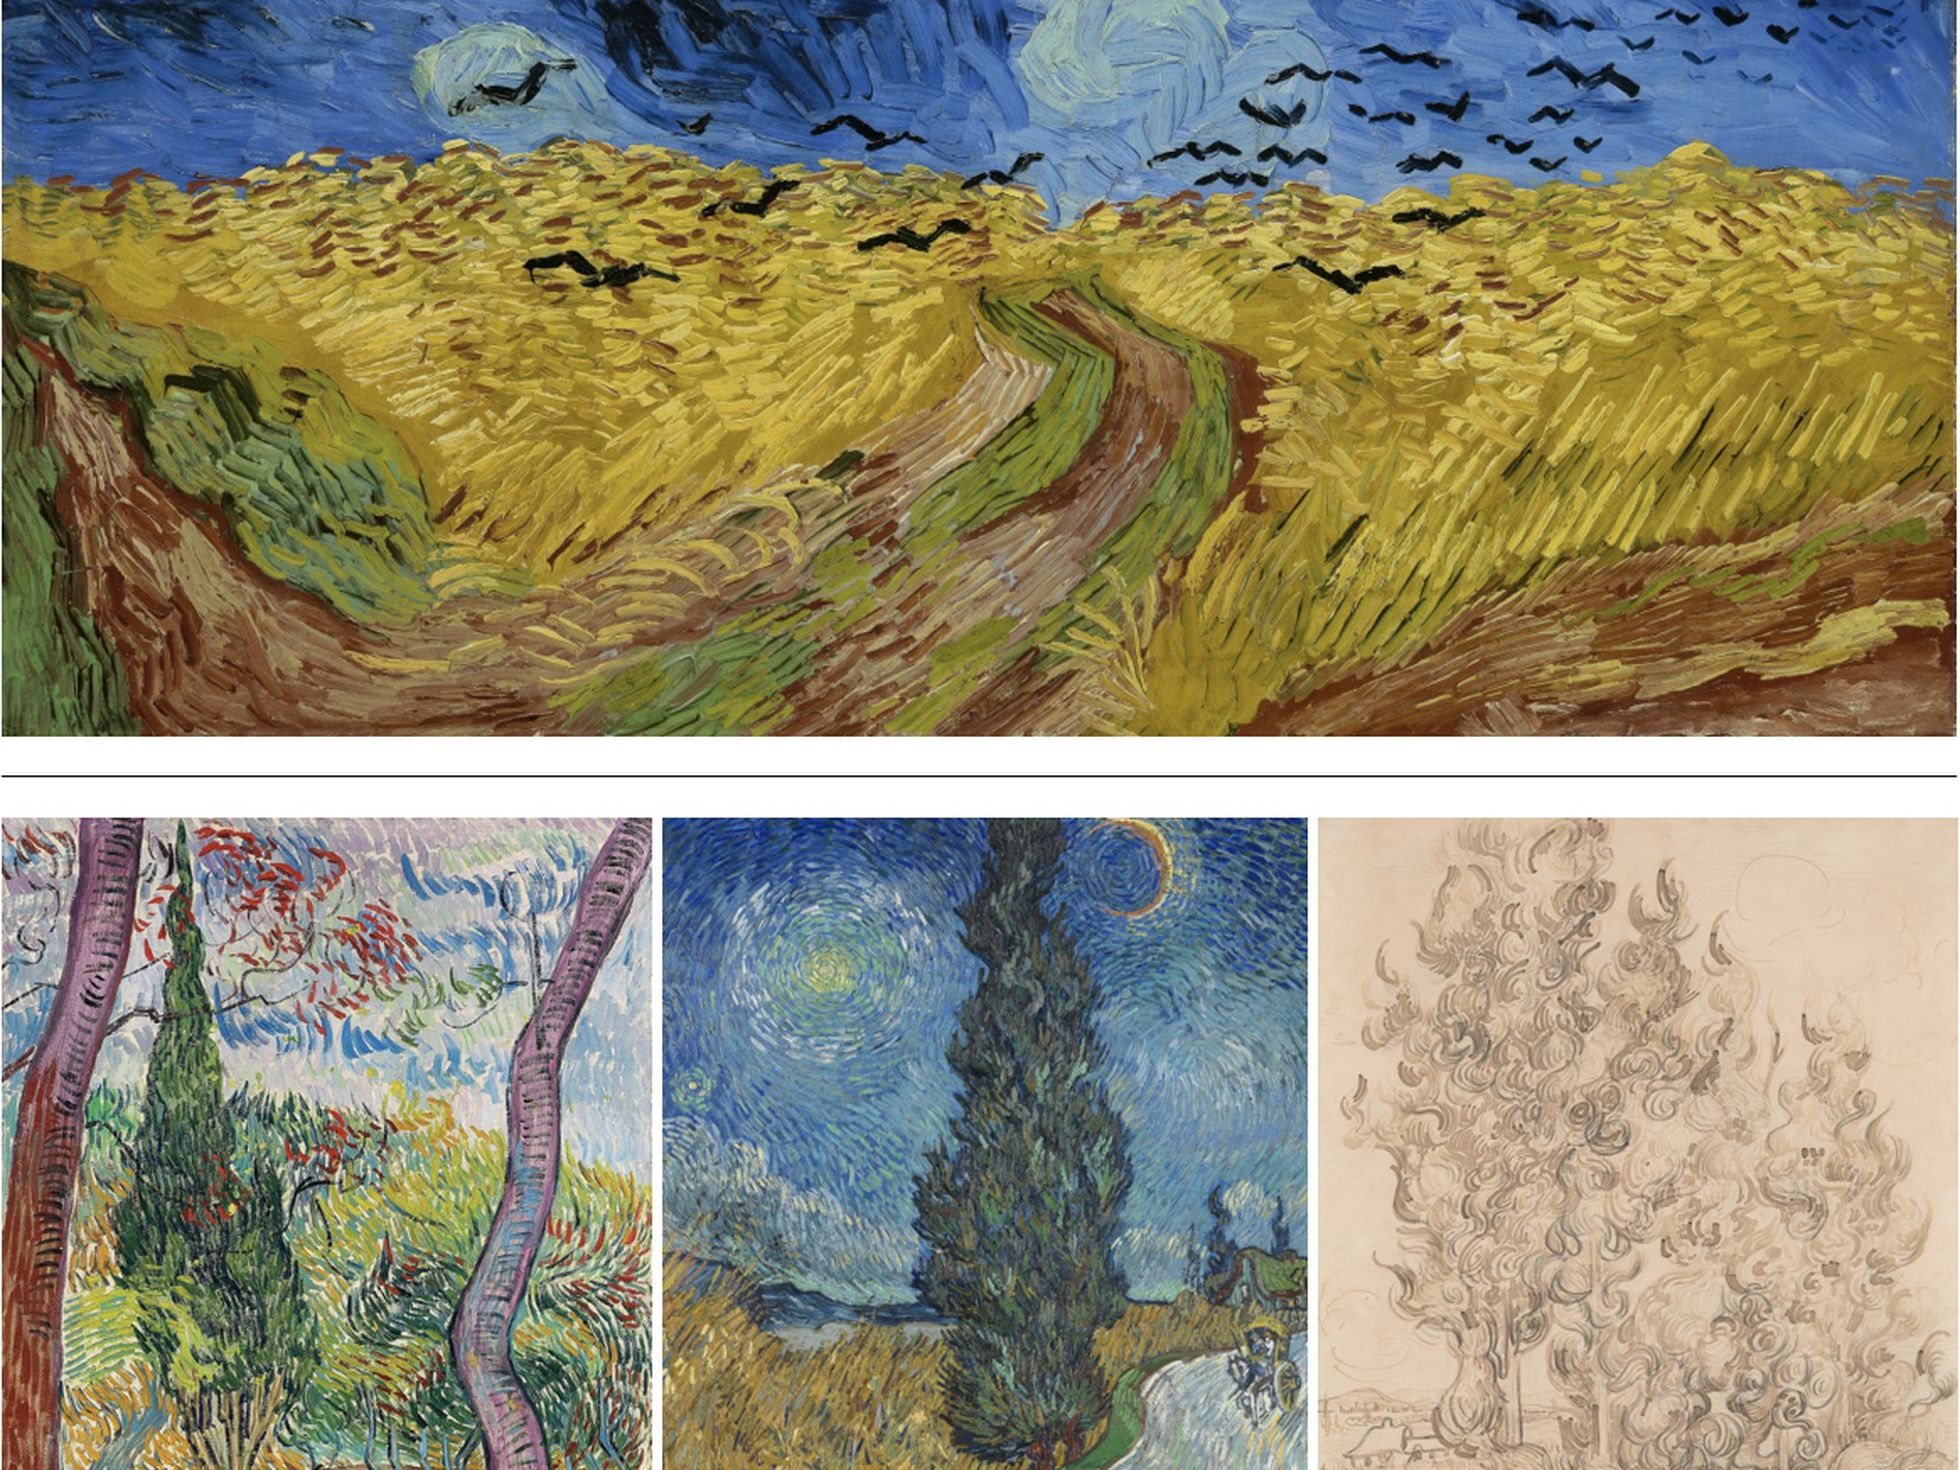 Is This Landscape a Long-Lost Vincent van Gogh Painting?, Smart News